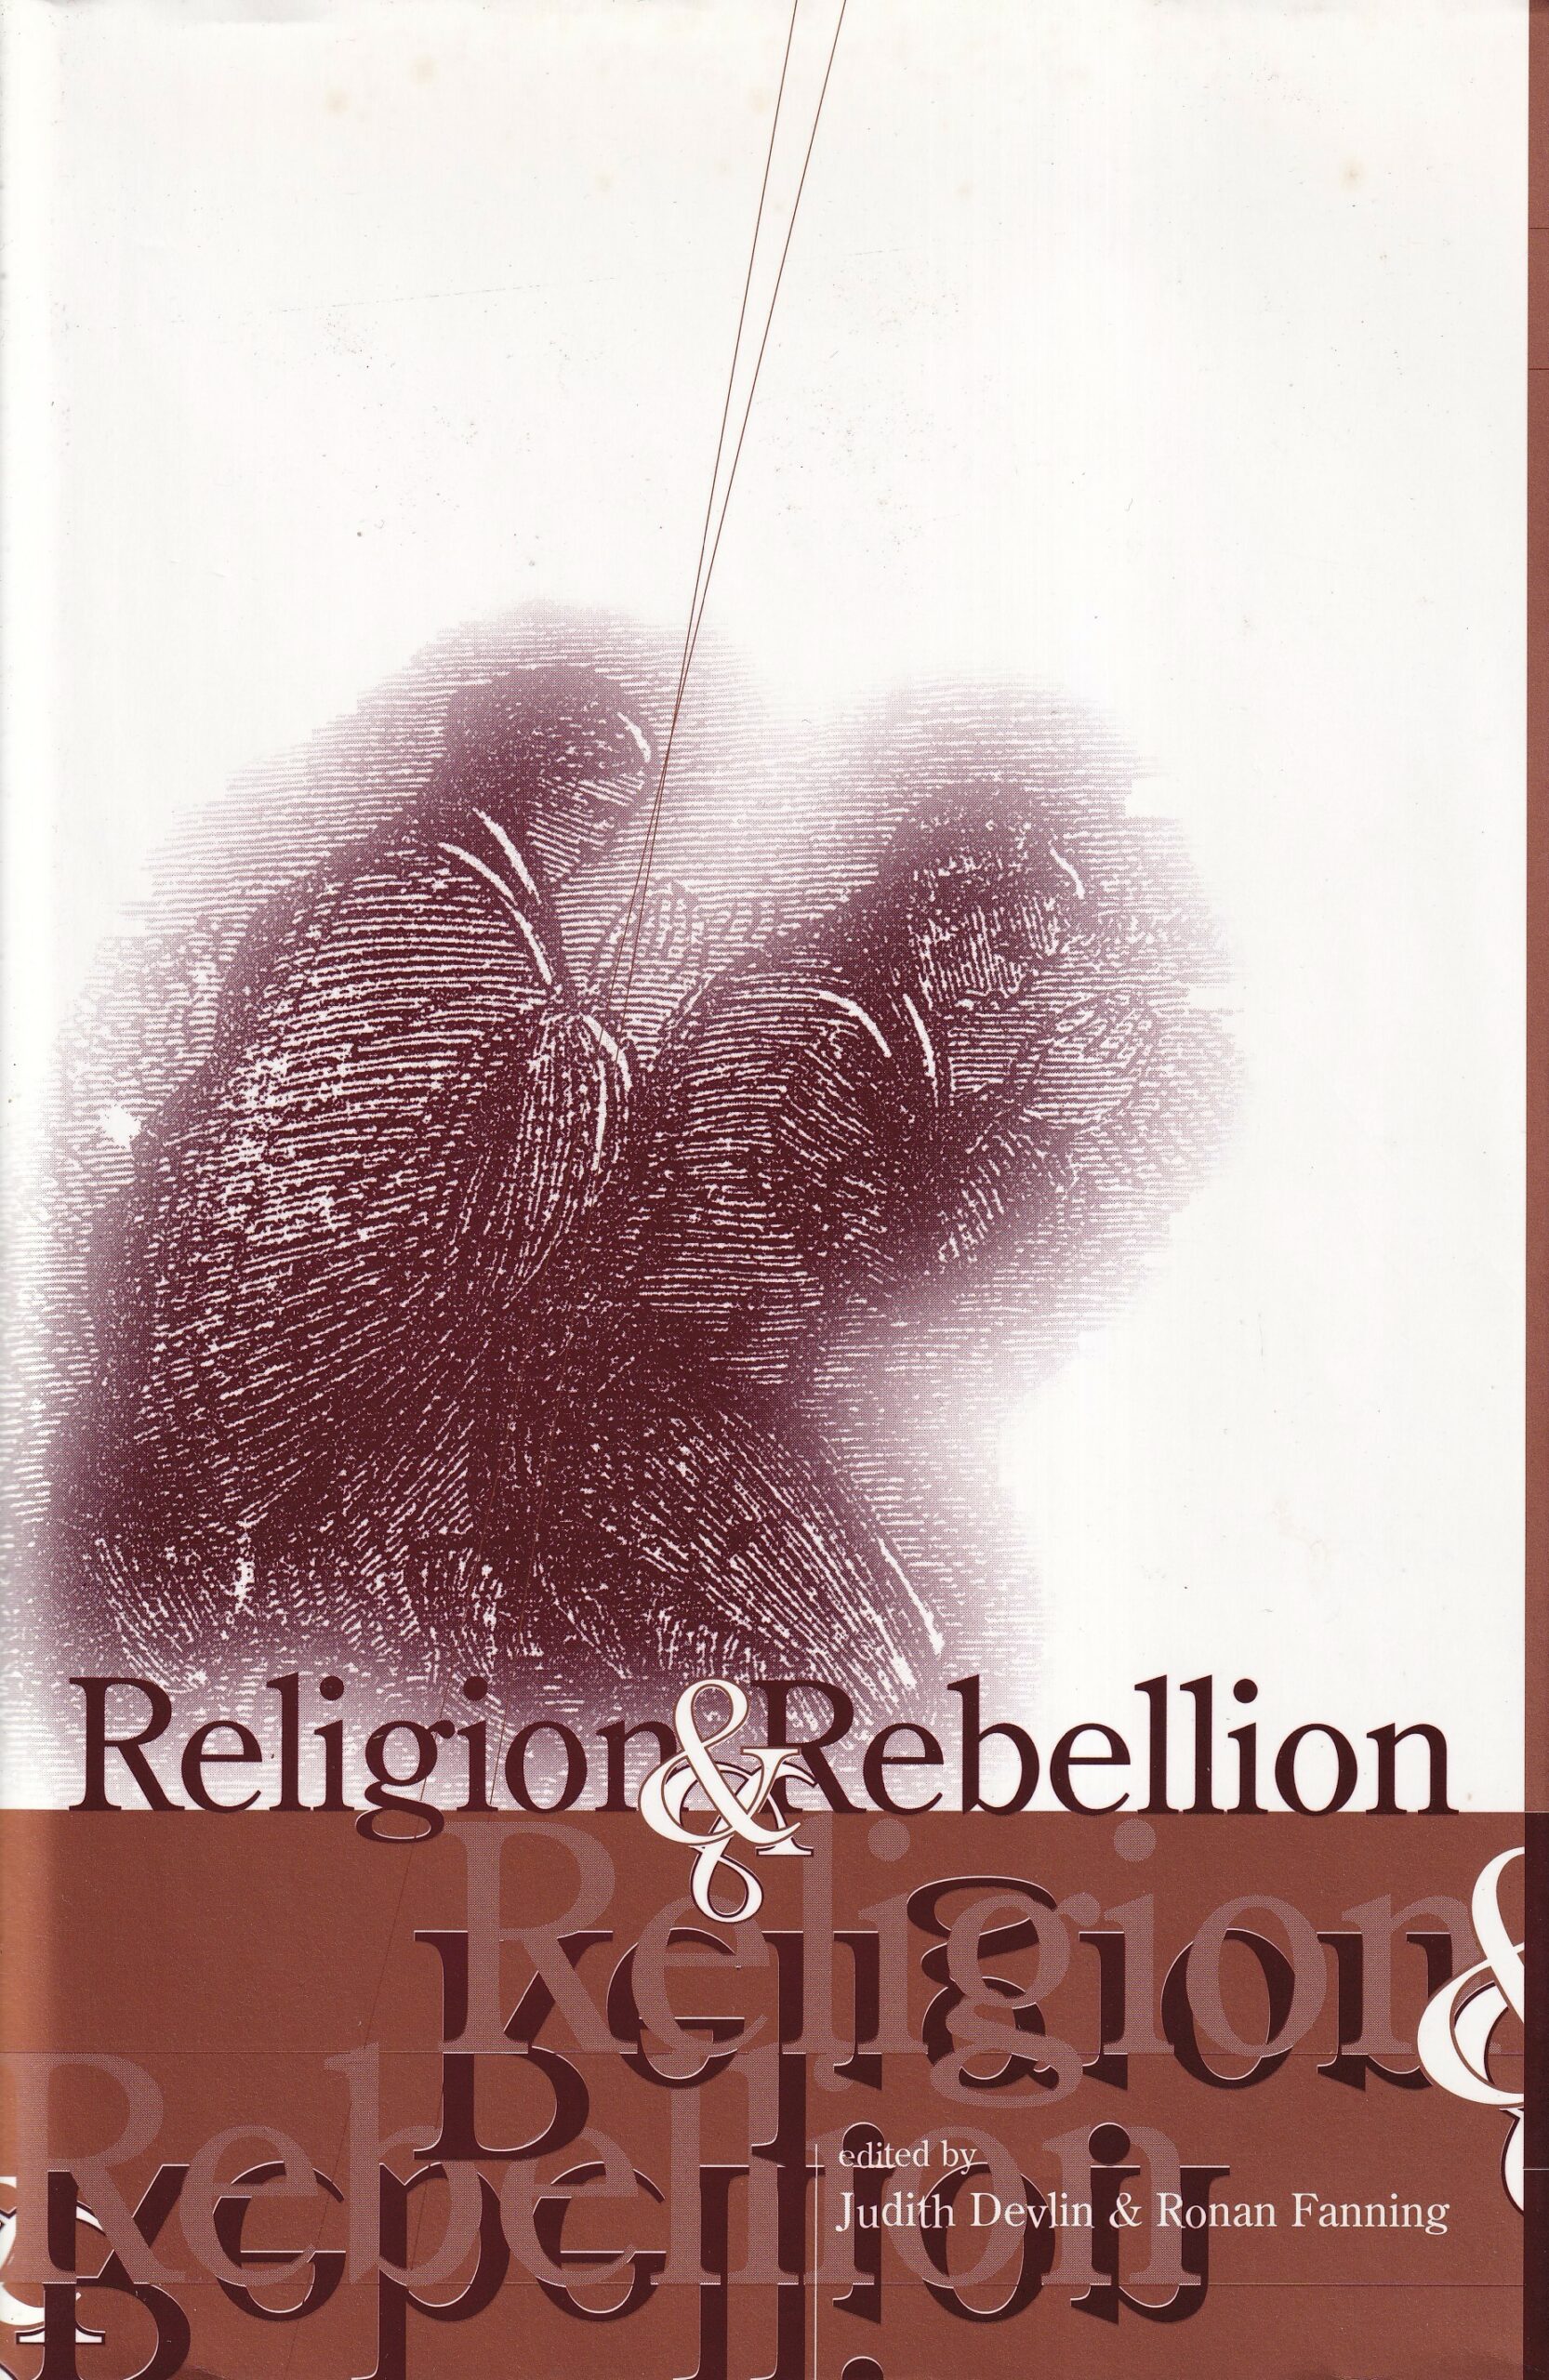 Religion and Rebellion by Judith Devlin and Ronan Fanning (eds.)